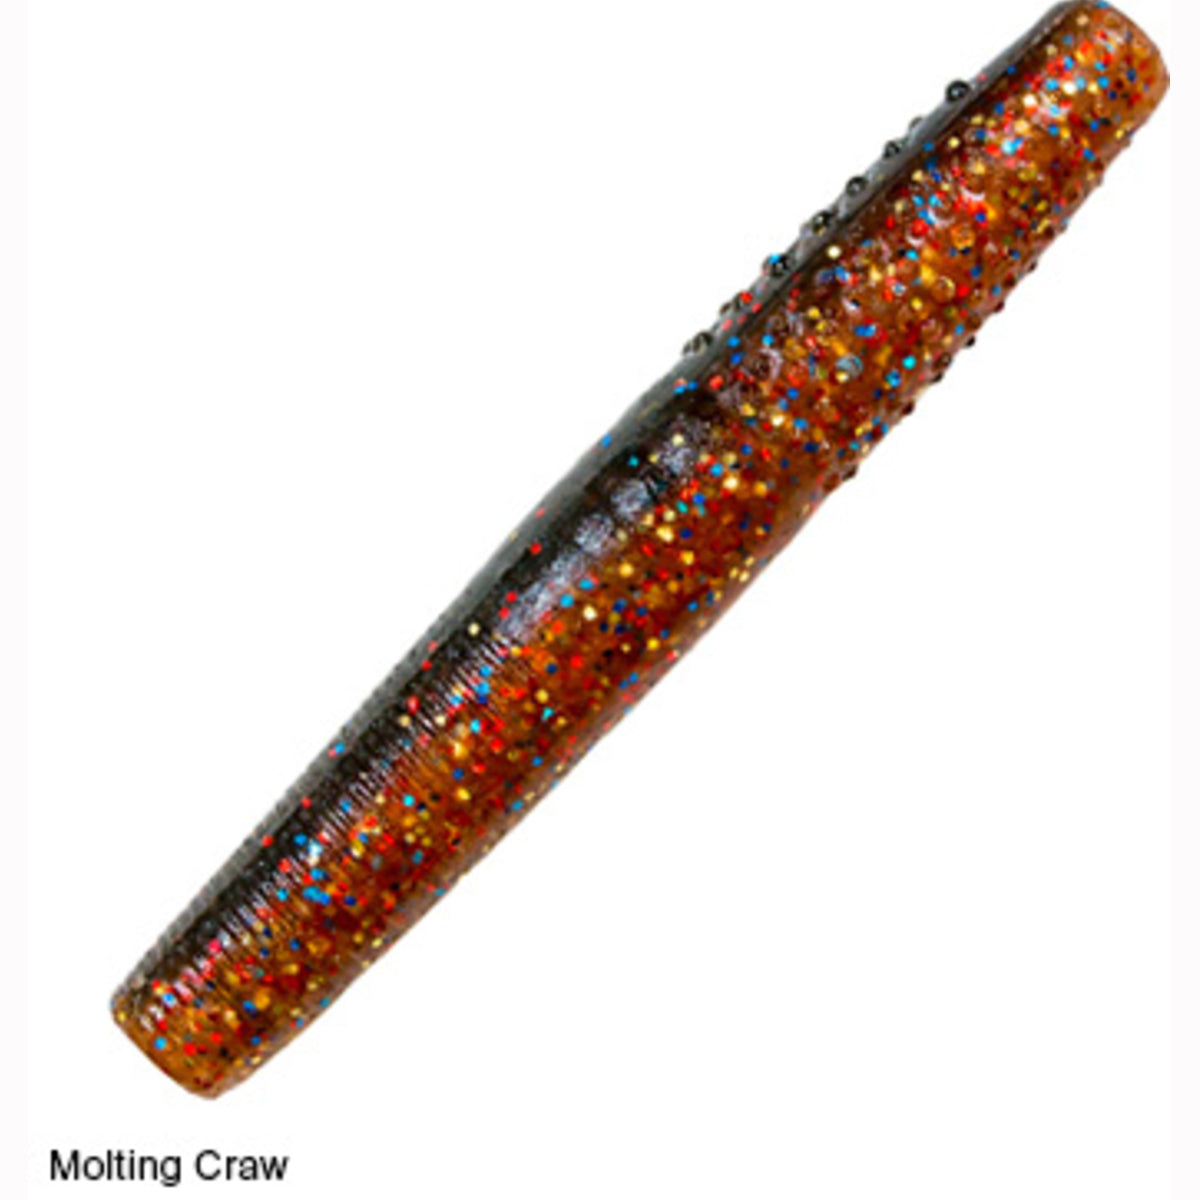 Z Man Finesse TRD - Molting Craw